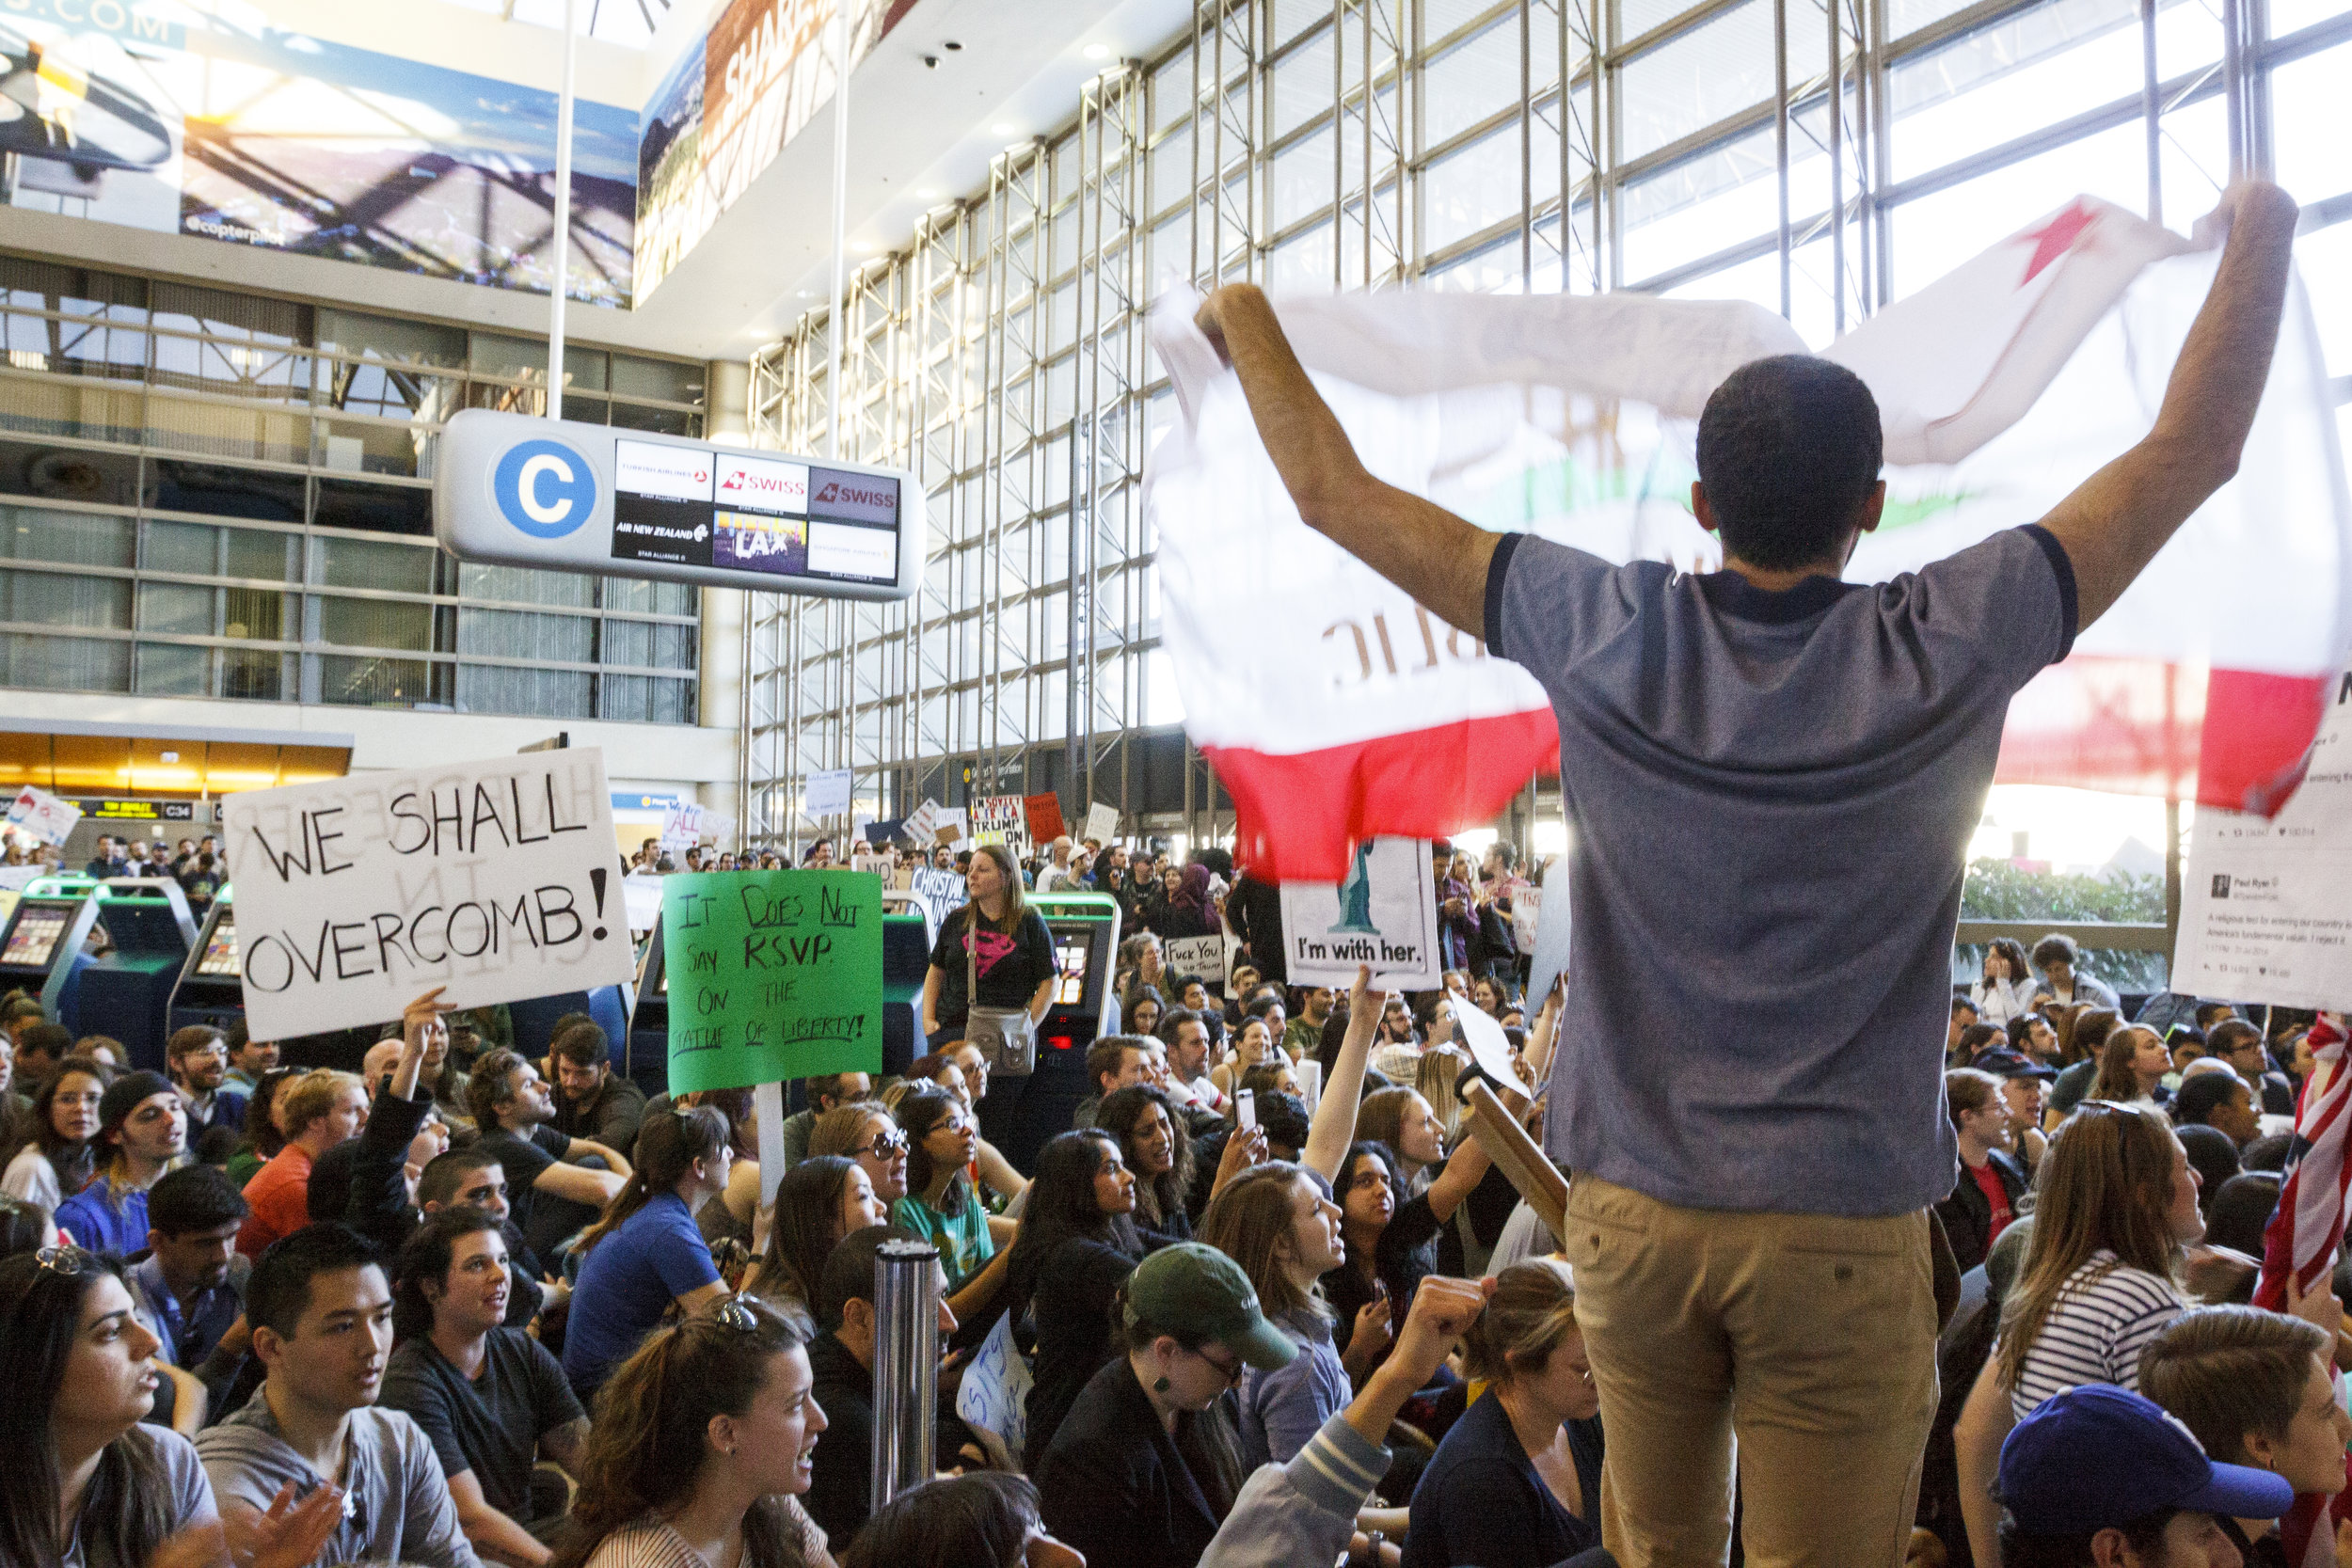  LAX anti-Travel Ban Protest  January 29th, 2017 